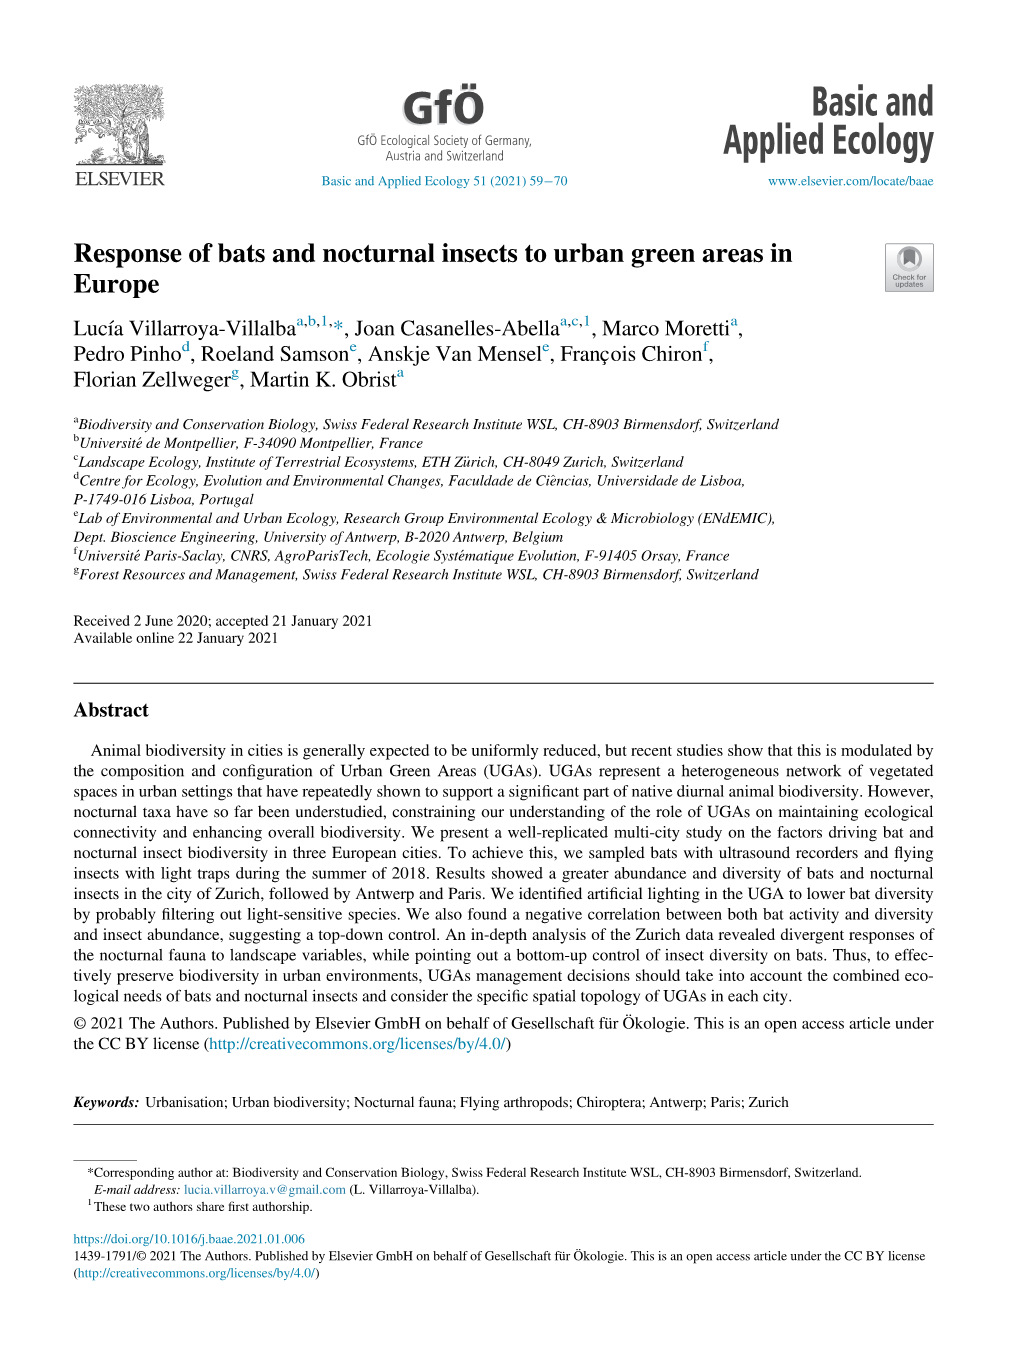 Response of Bats and Nocturnal Insects to Urban Green Areas In